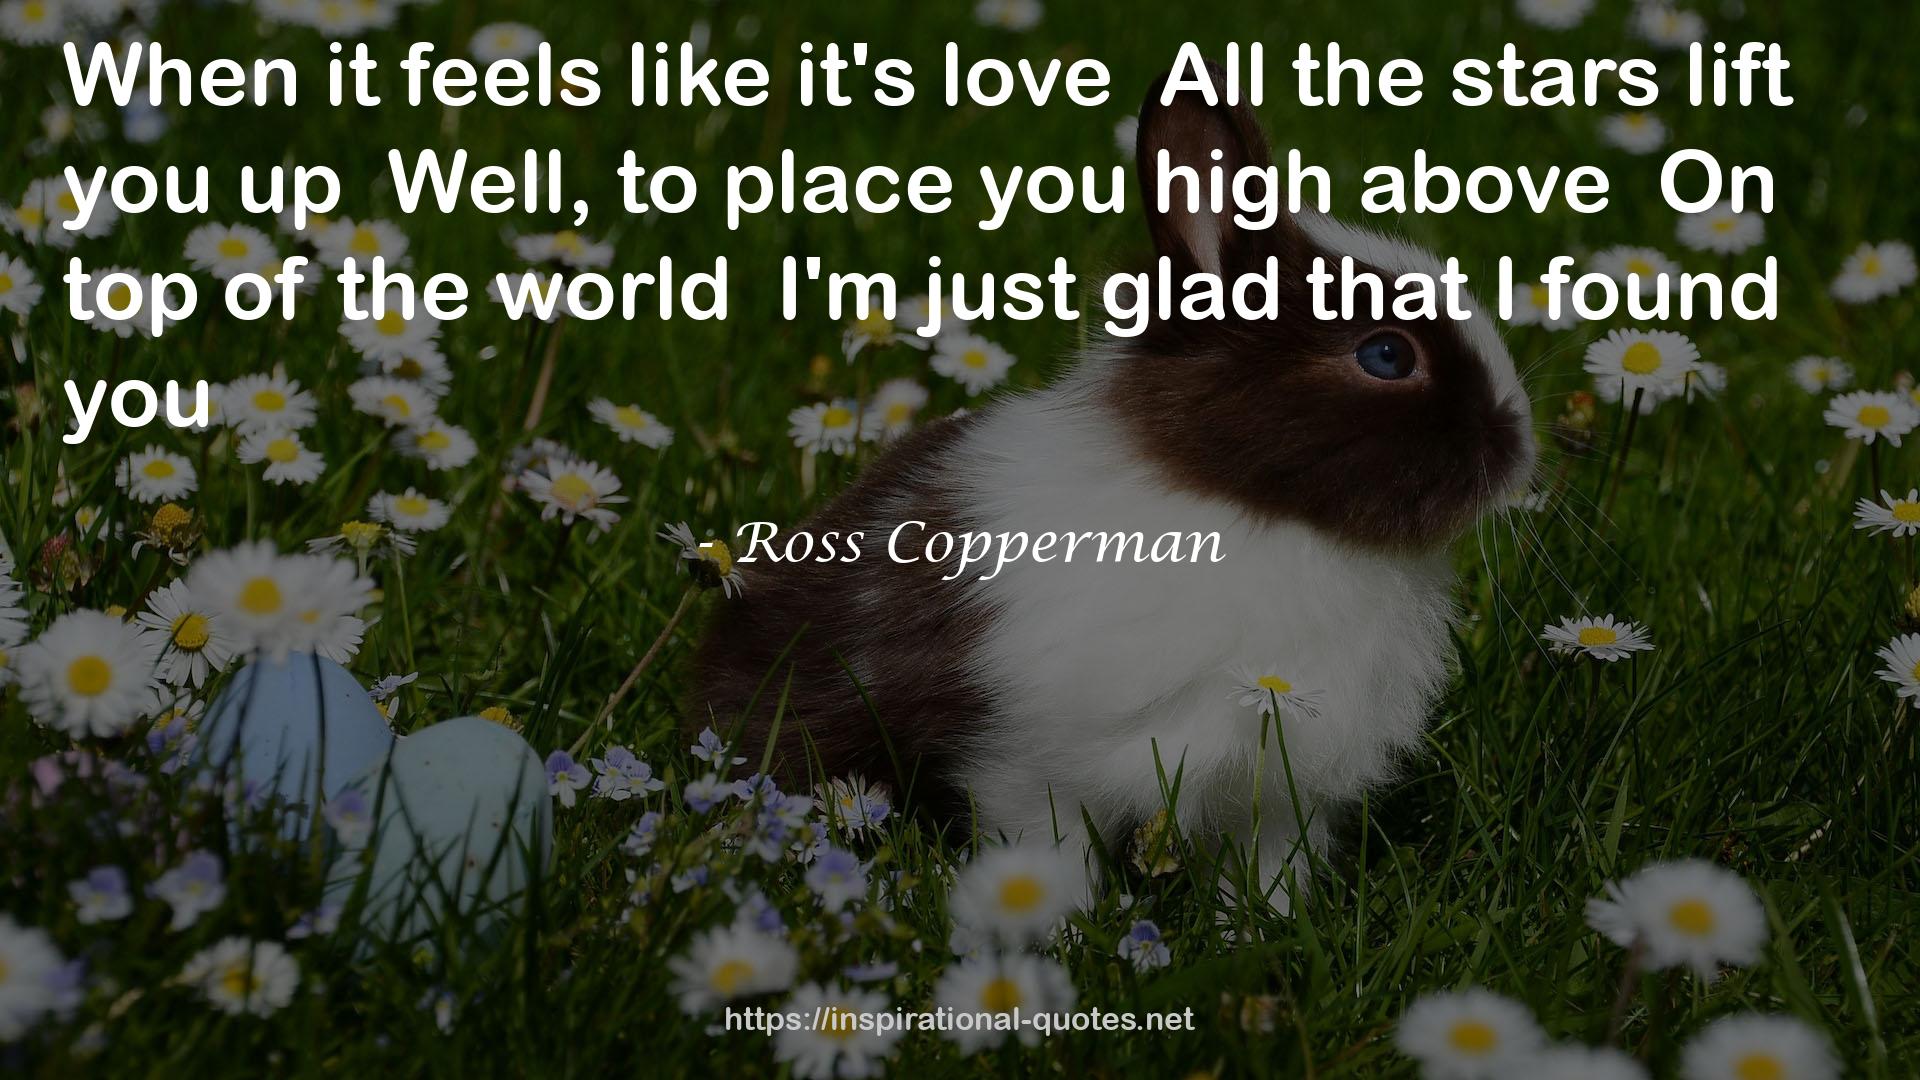 Ross Copperman QUOTES